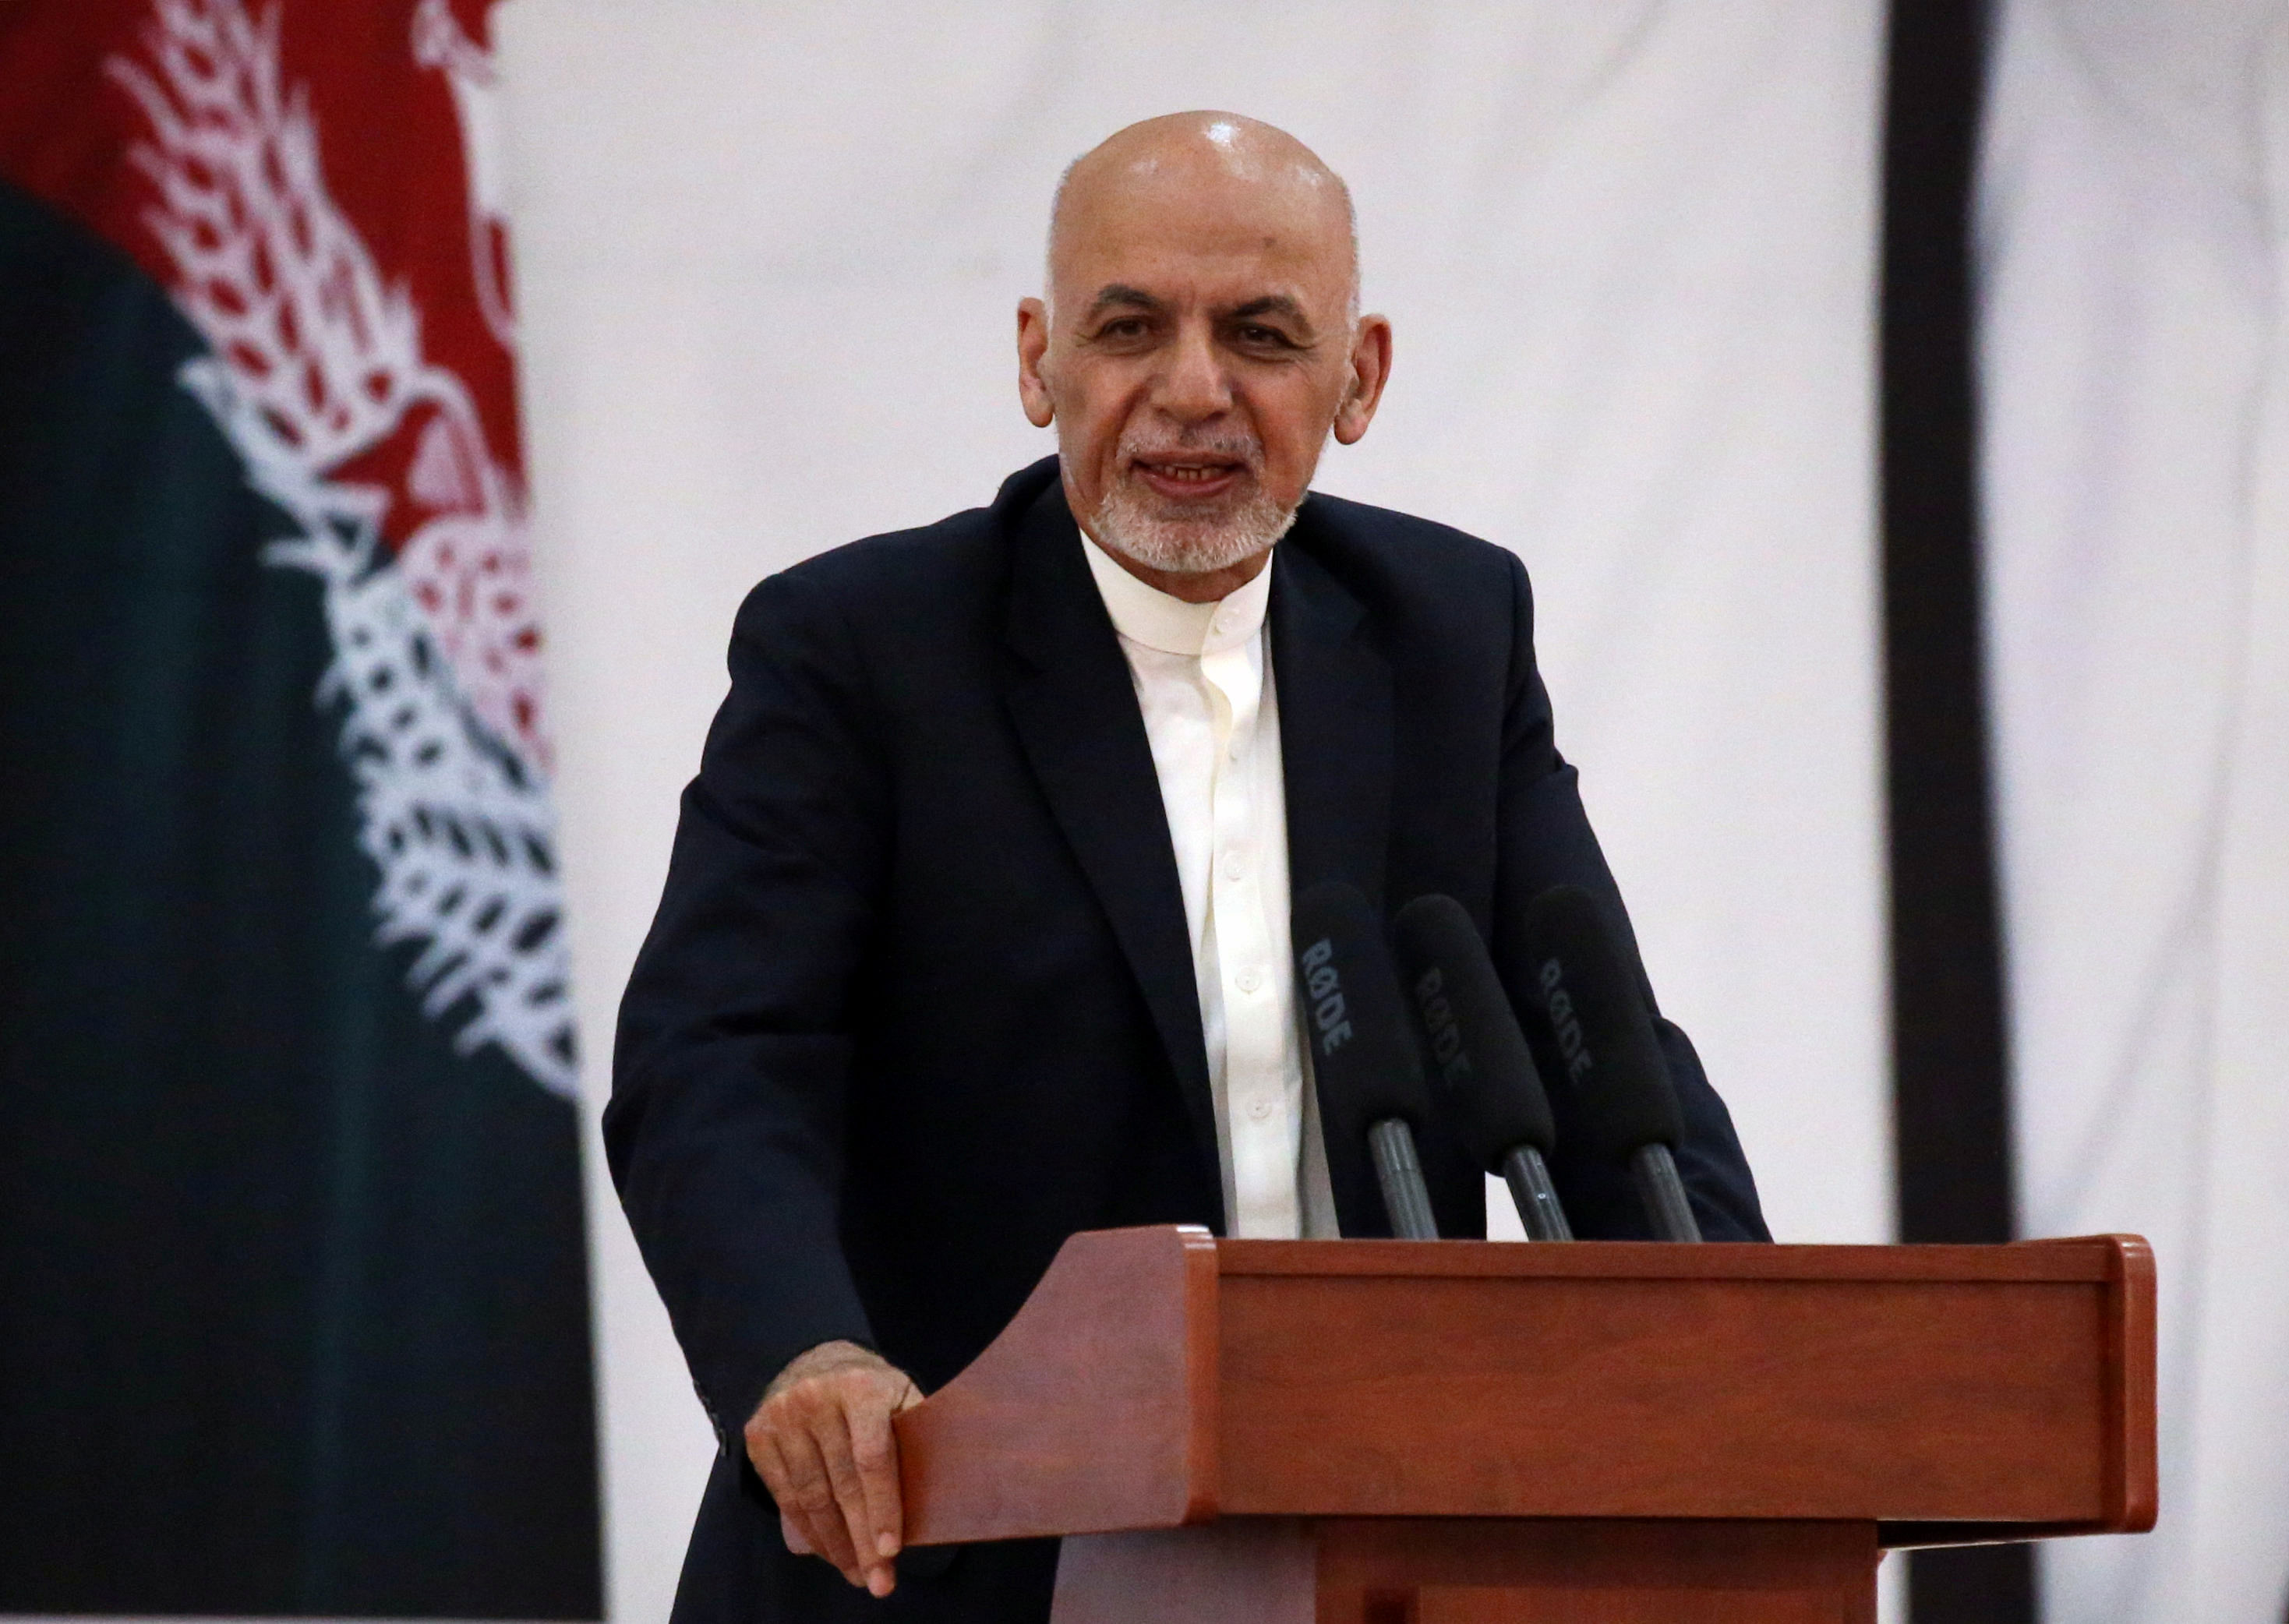 Afghanistan's President Ashraf Ghani speaks during an event with Afghan security forces in Kabul. (Reuters Photo)